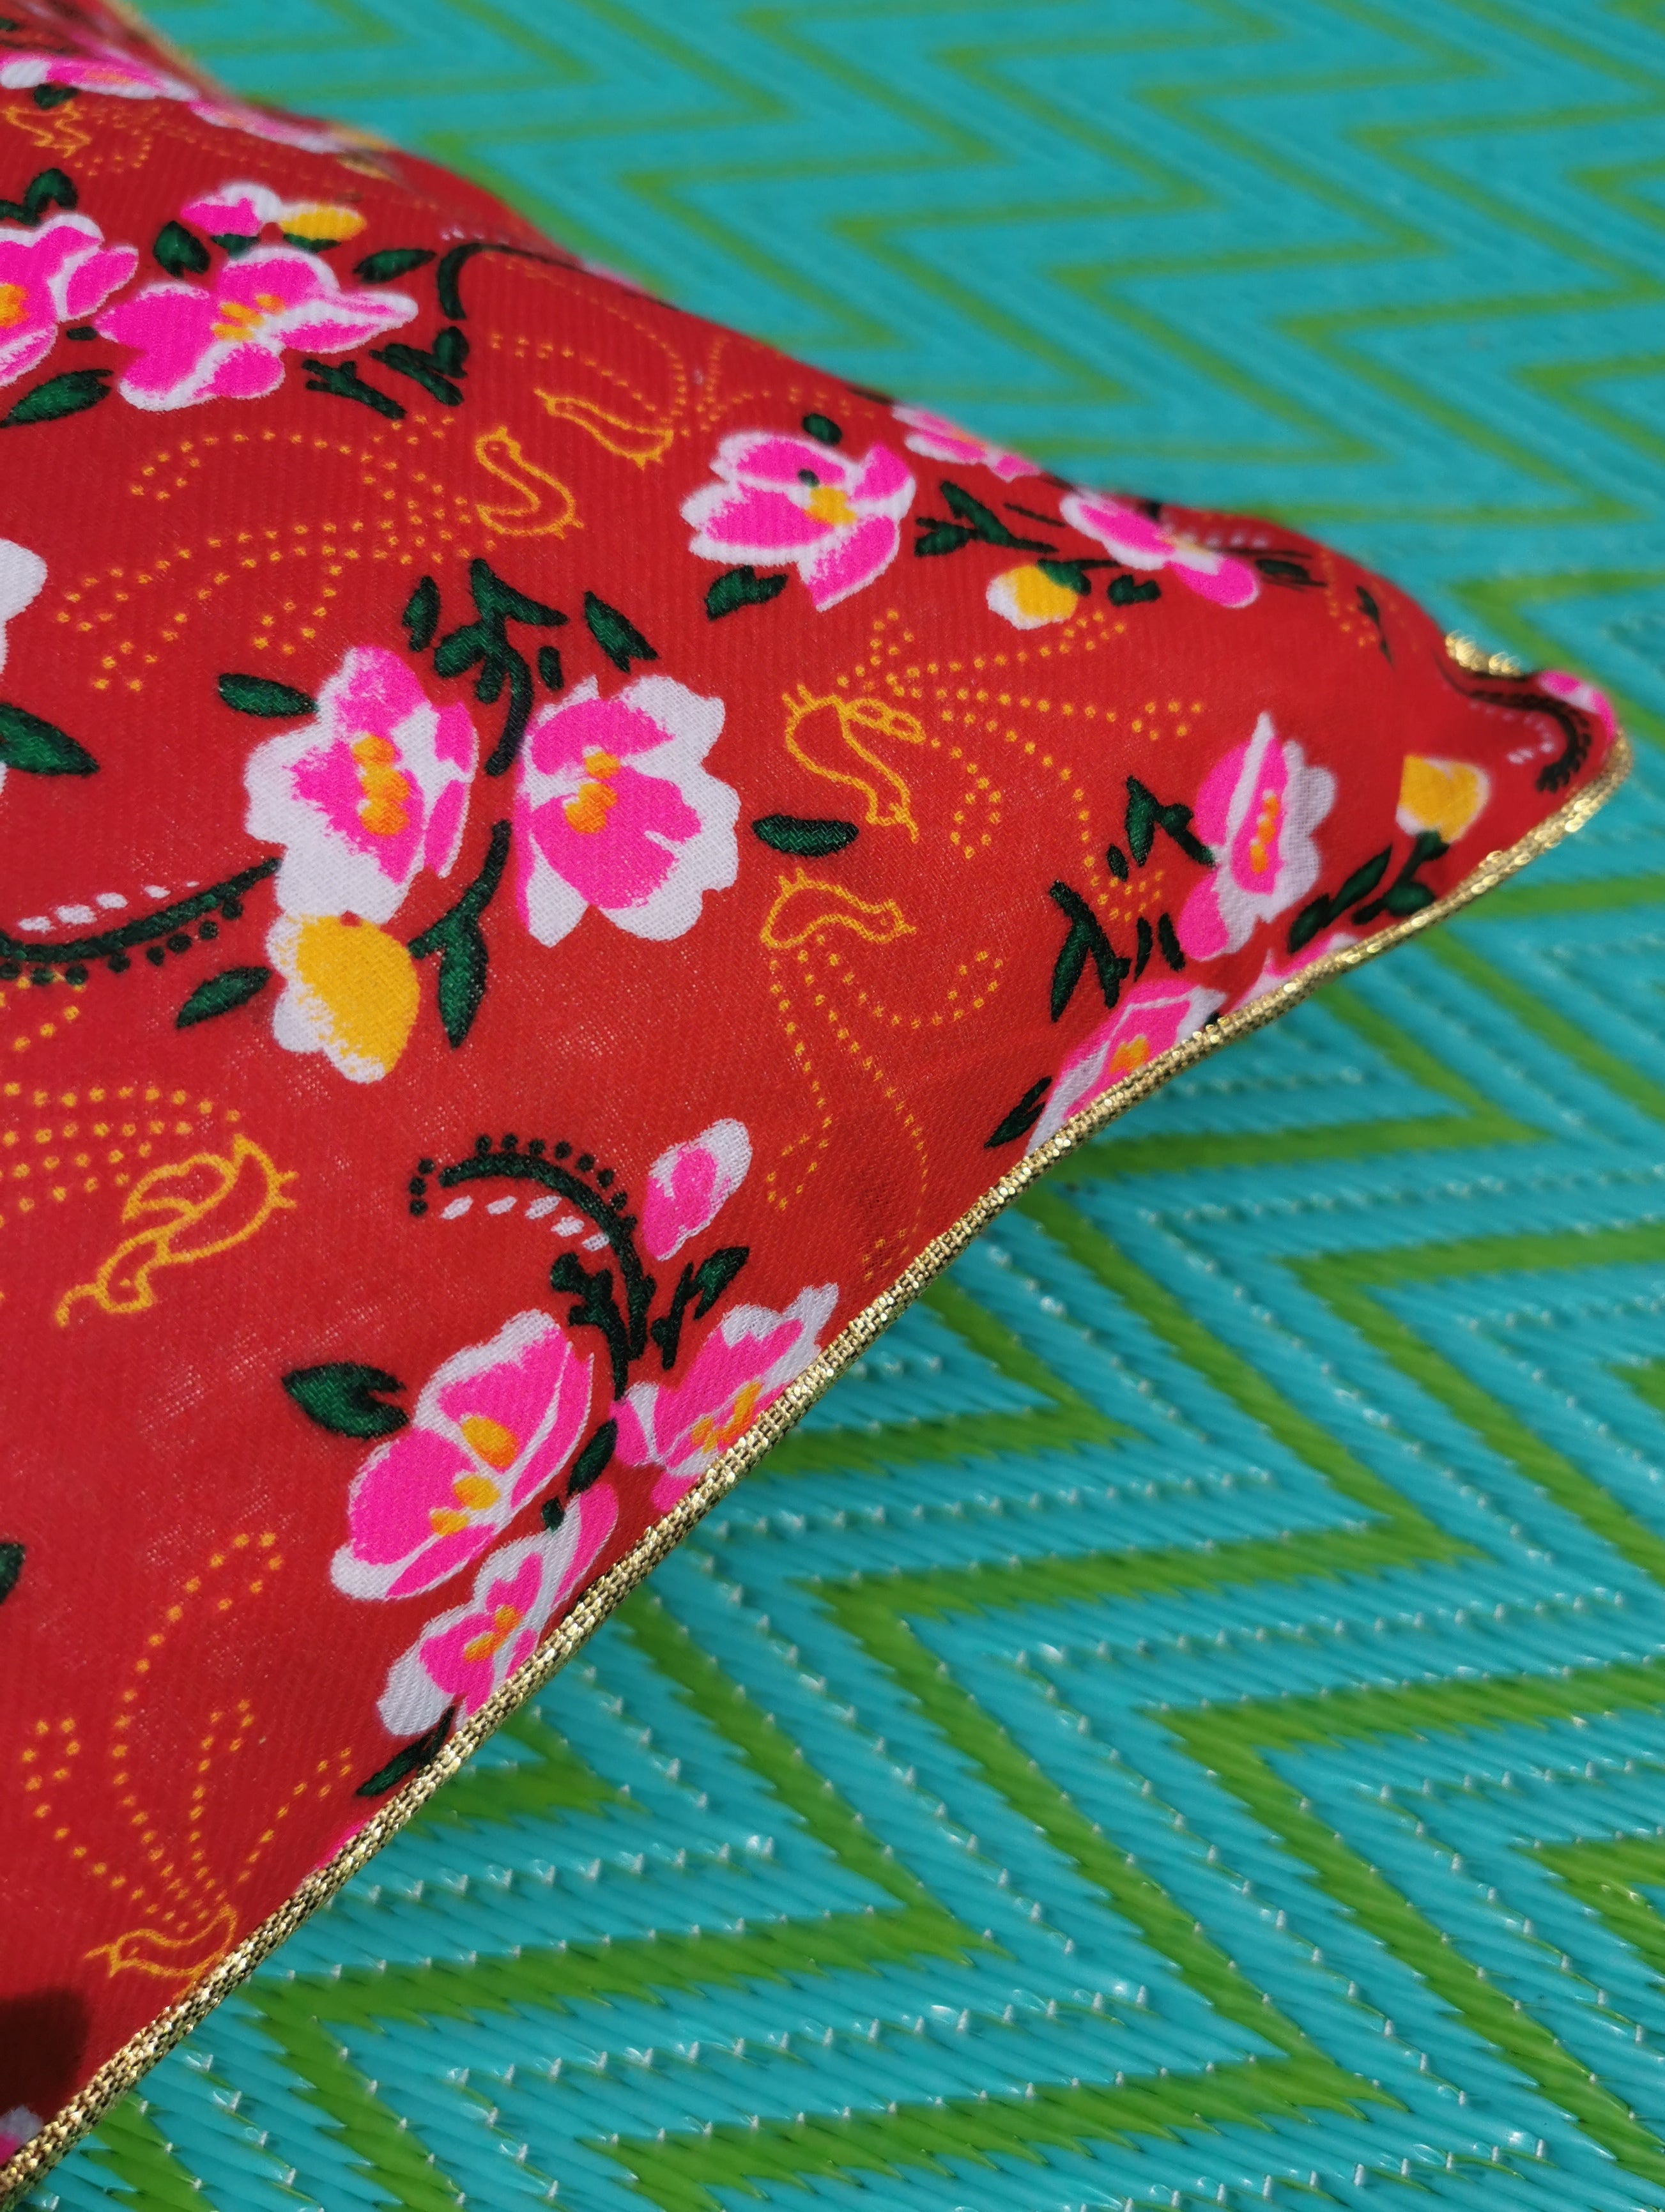 Nomad folky floral cushion